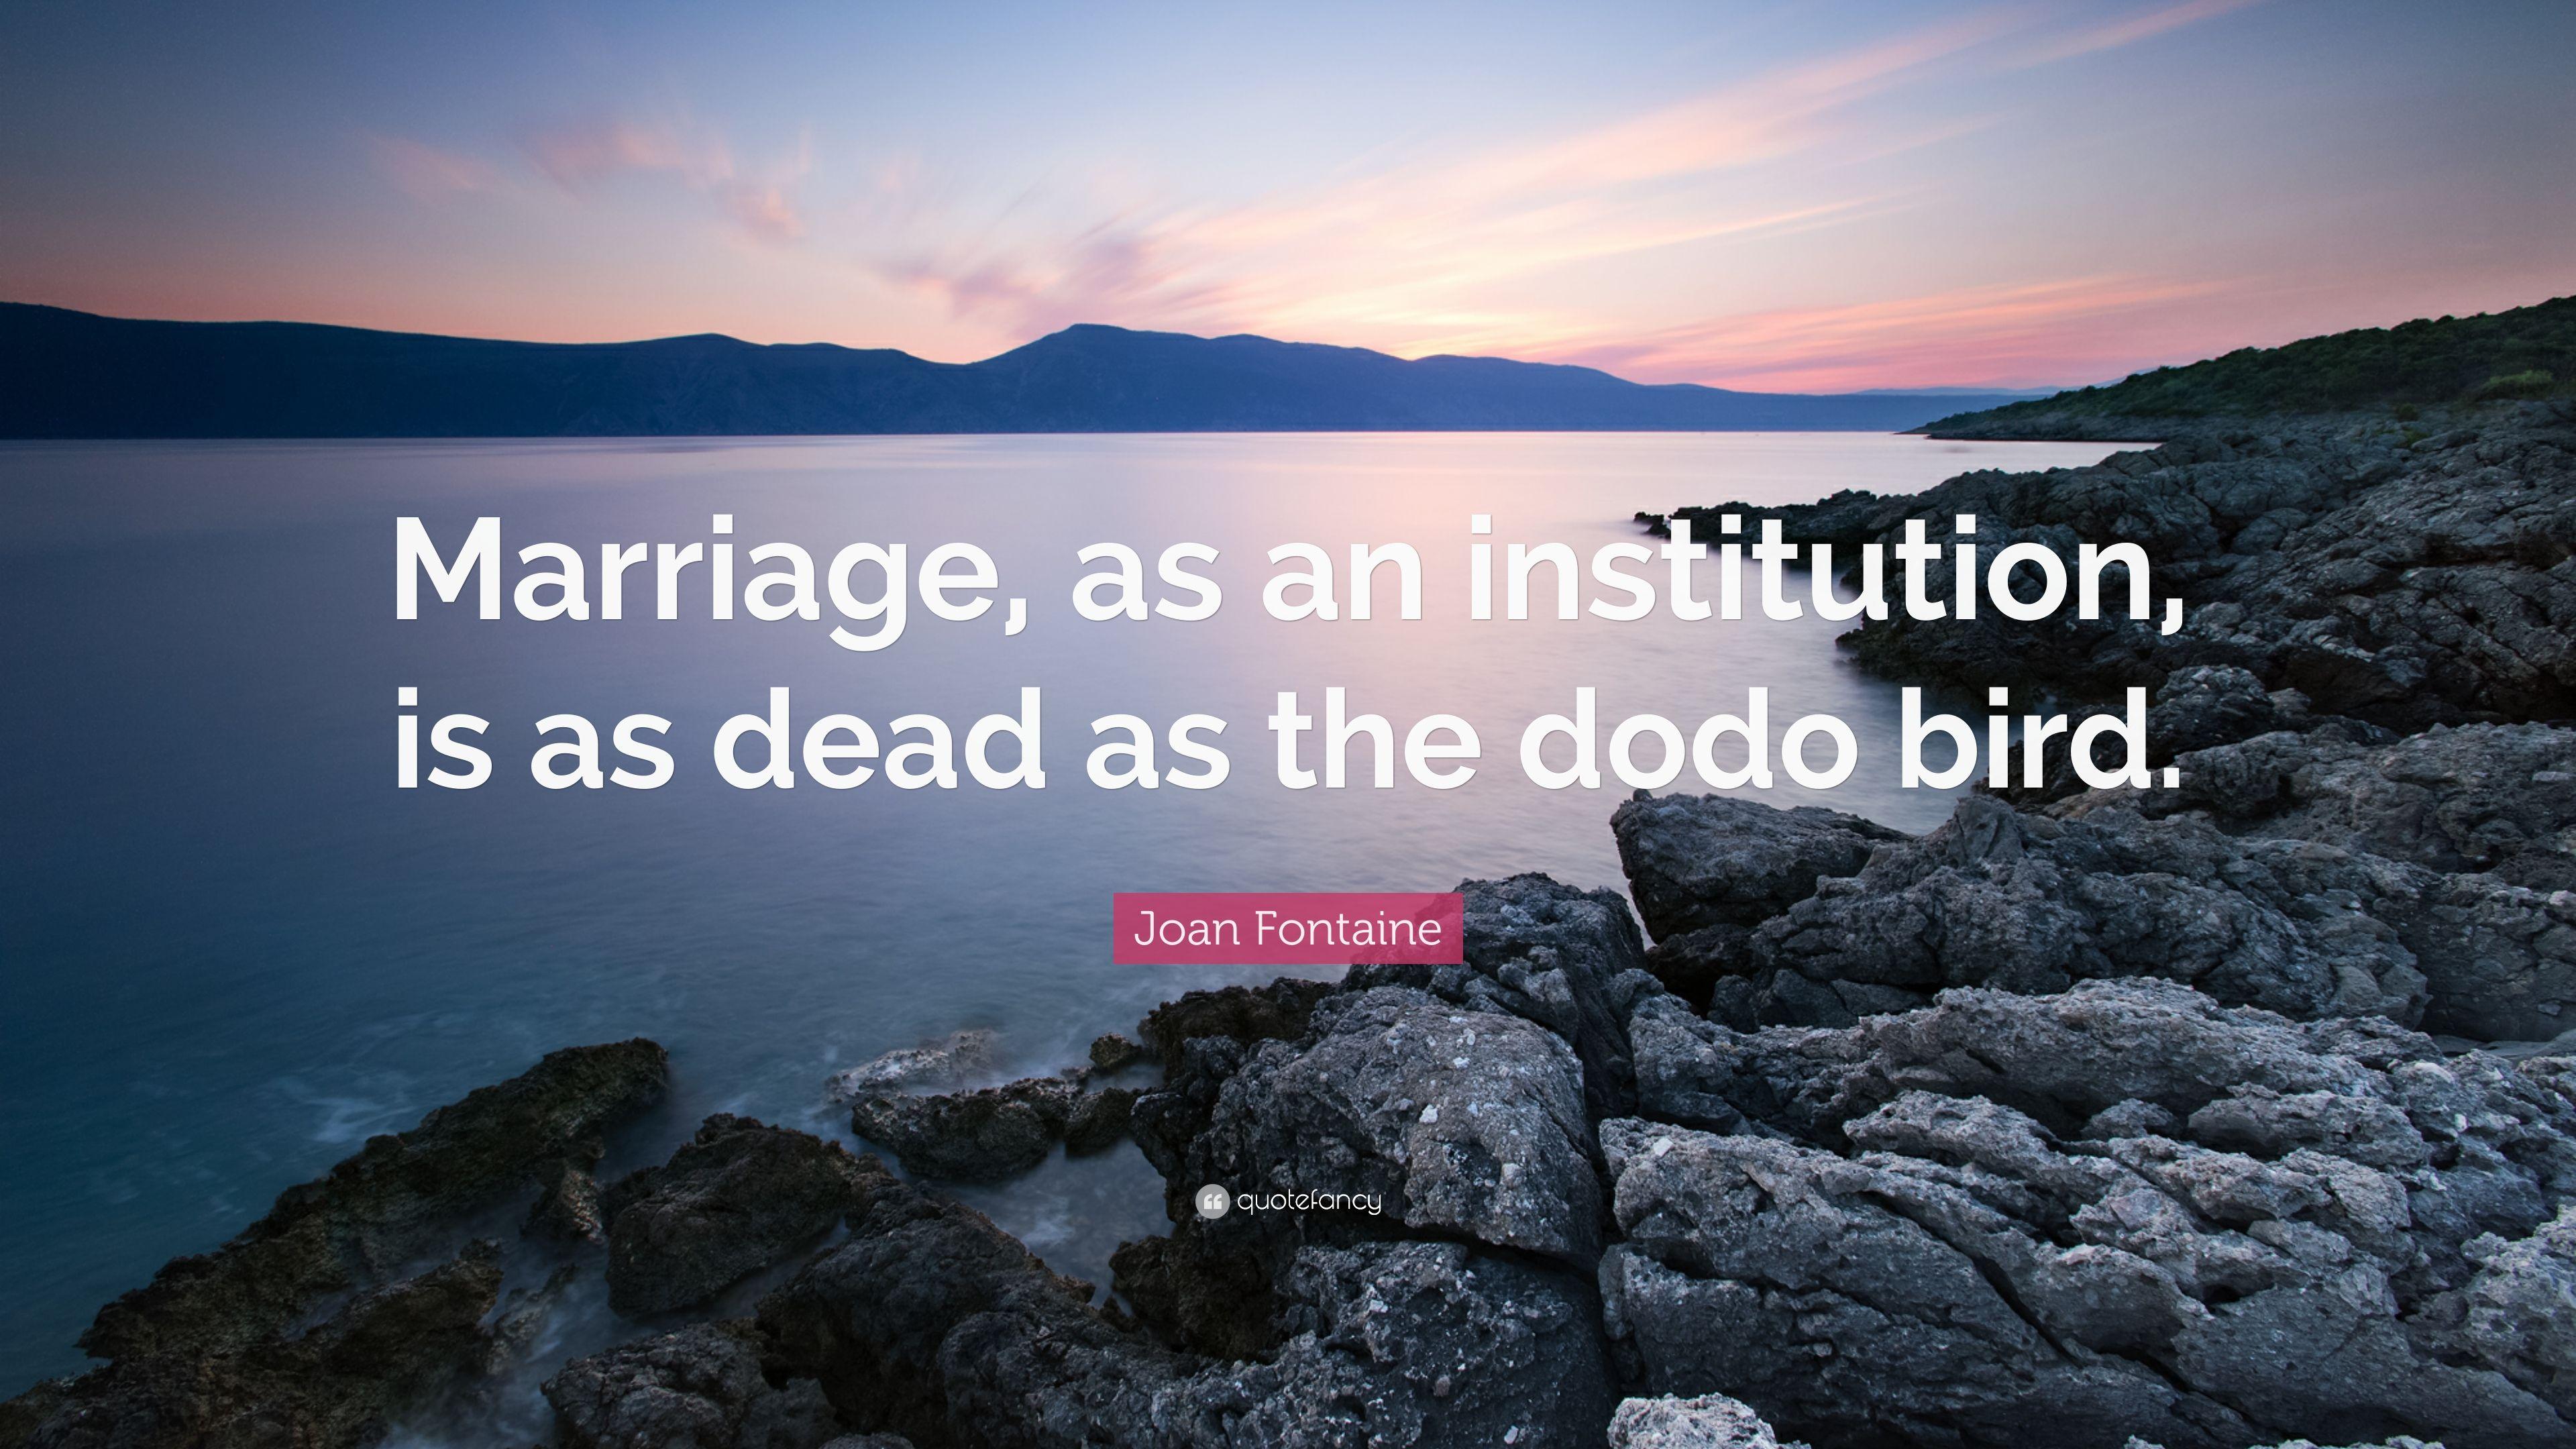 Joan Fontaine Quote: “Marriage, as an institution, is as dead as